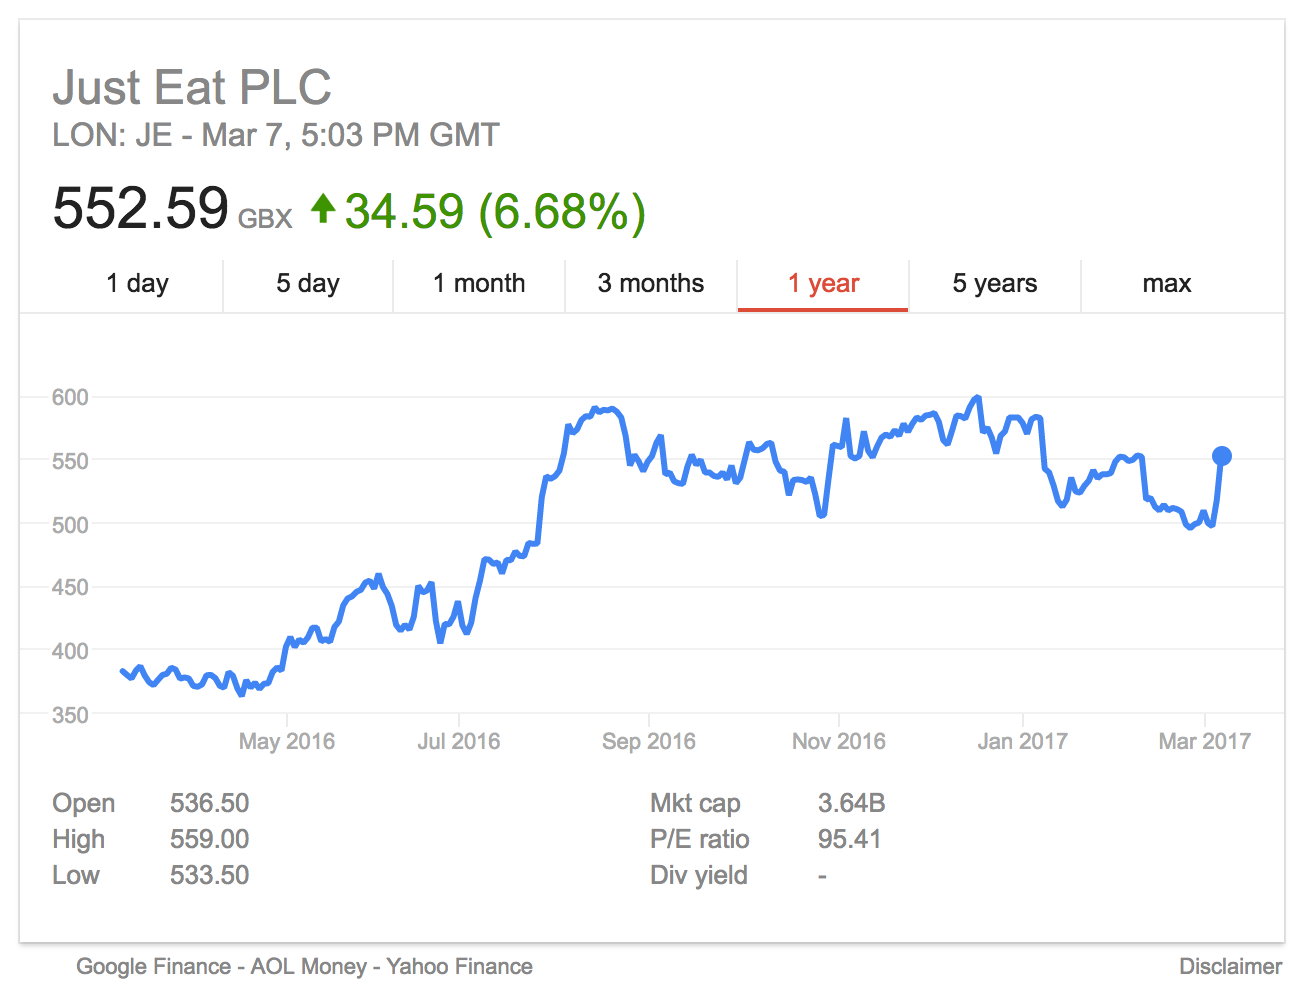 Just Eat share price March 2017